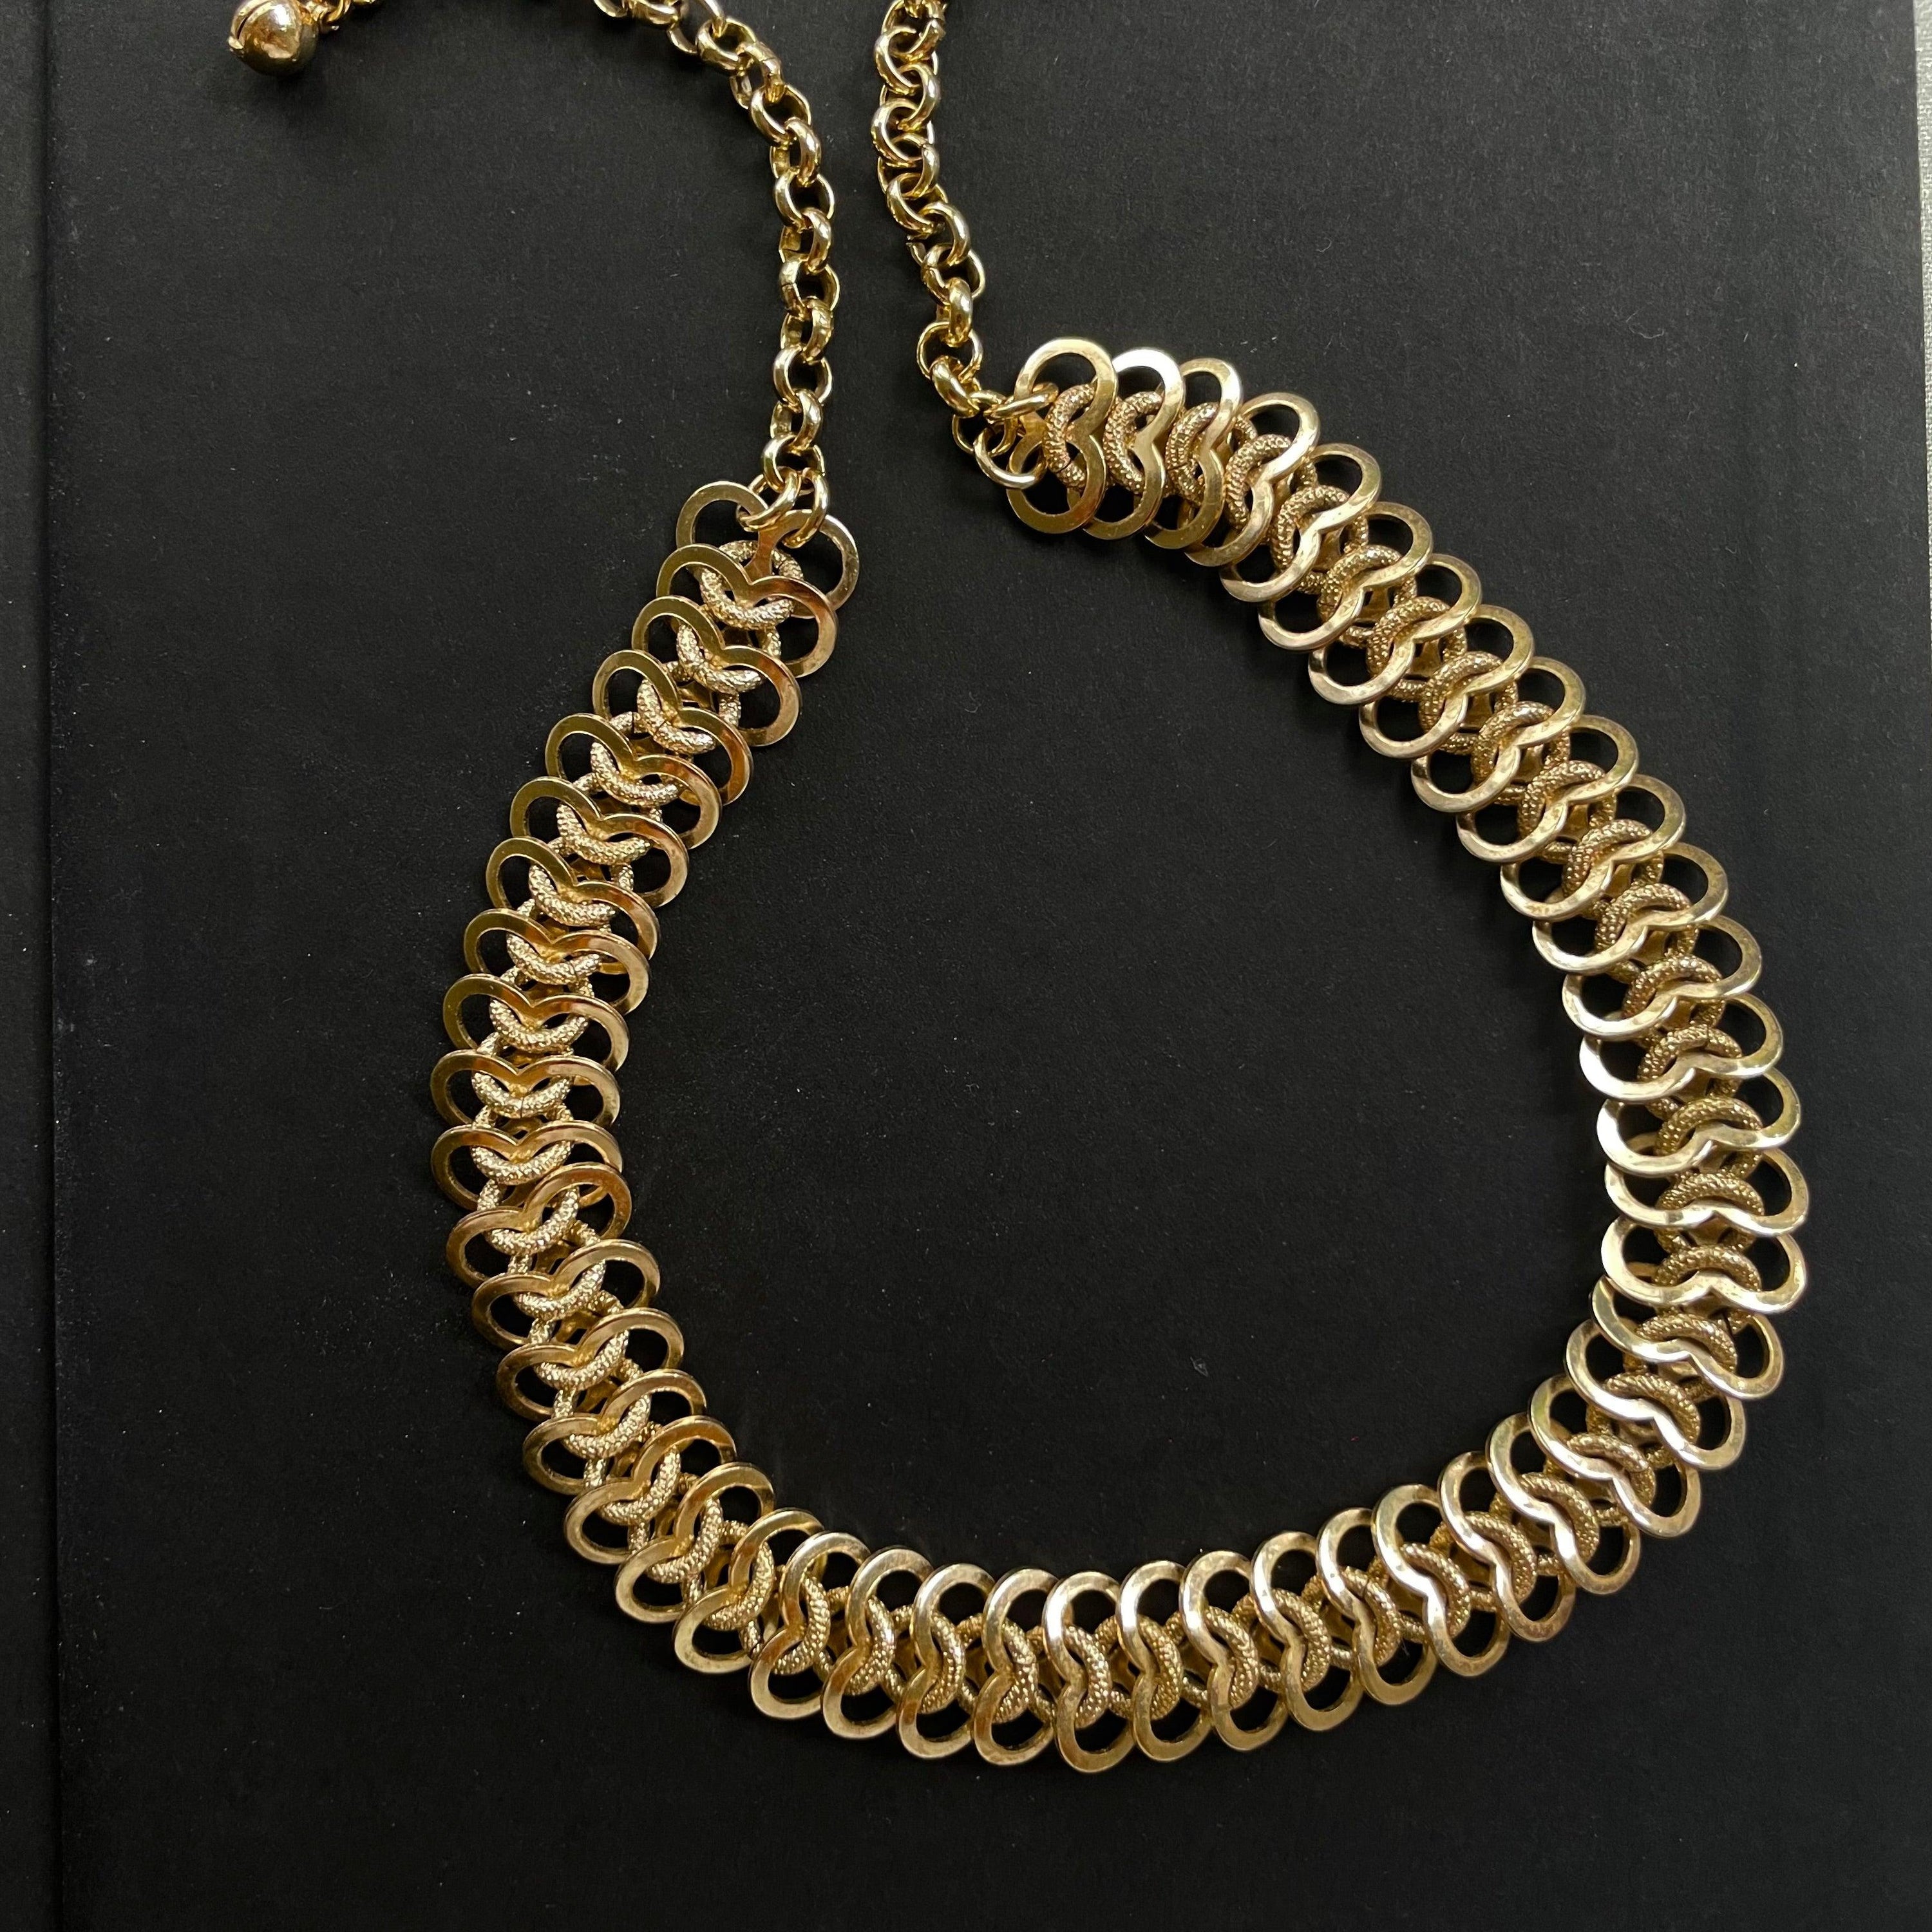 Vintage W. Germany champagne Collar Necklace - WŪHAŪS